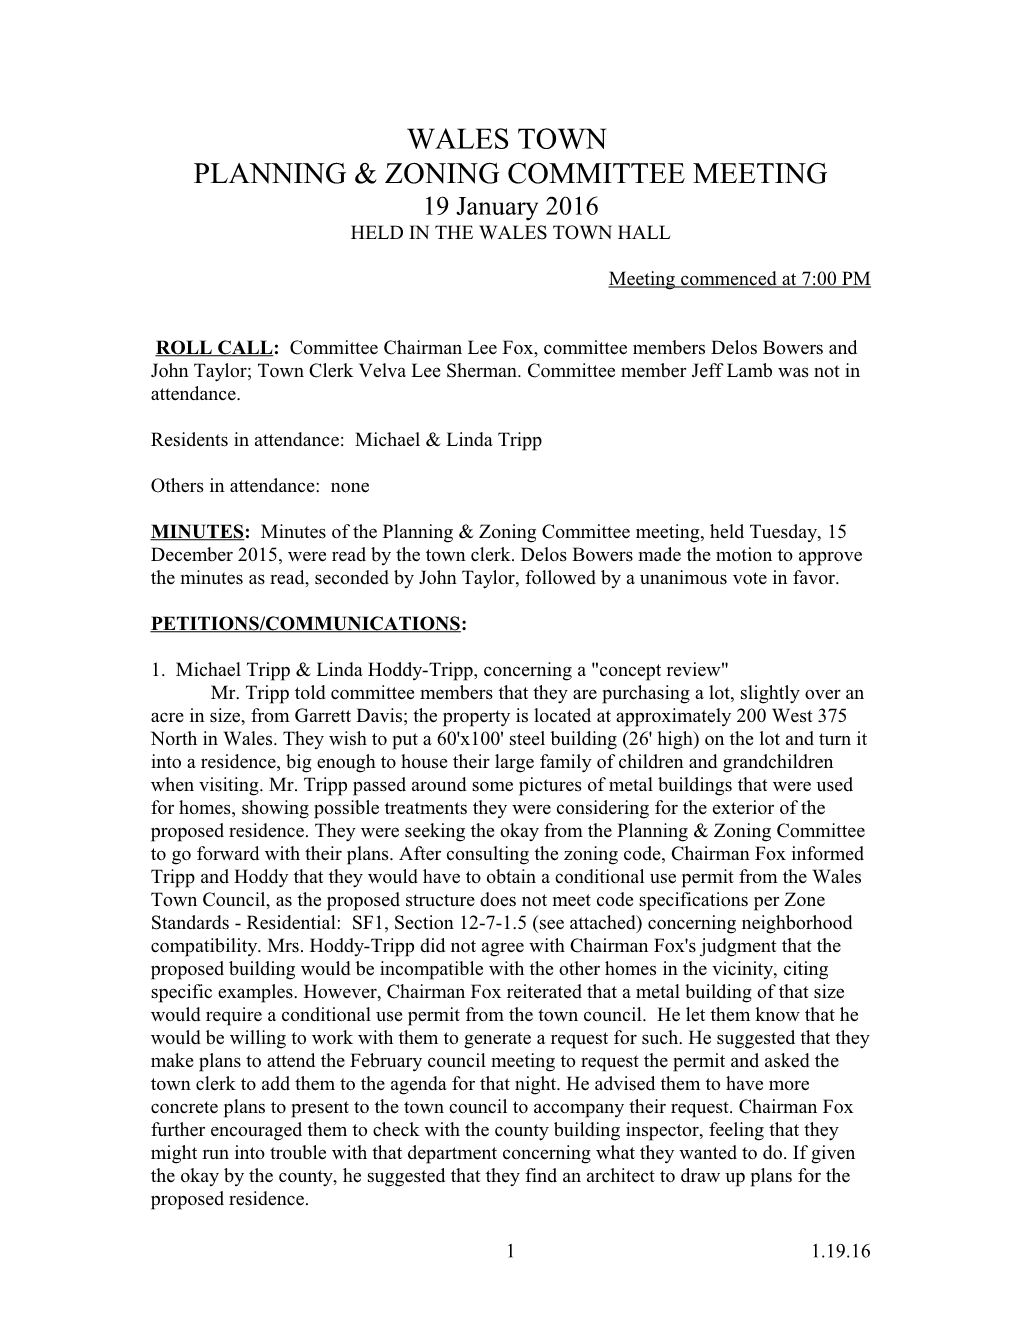 Wales Town Planning & Zoning Committee s1